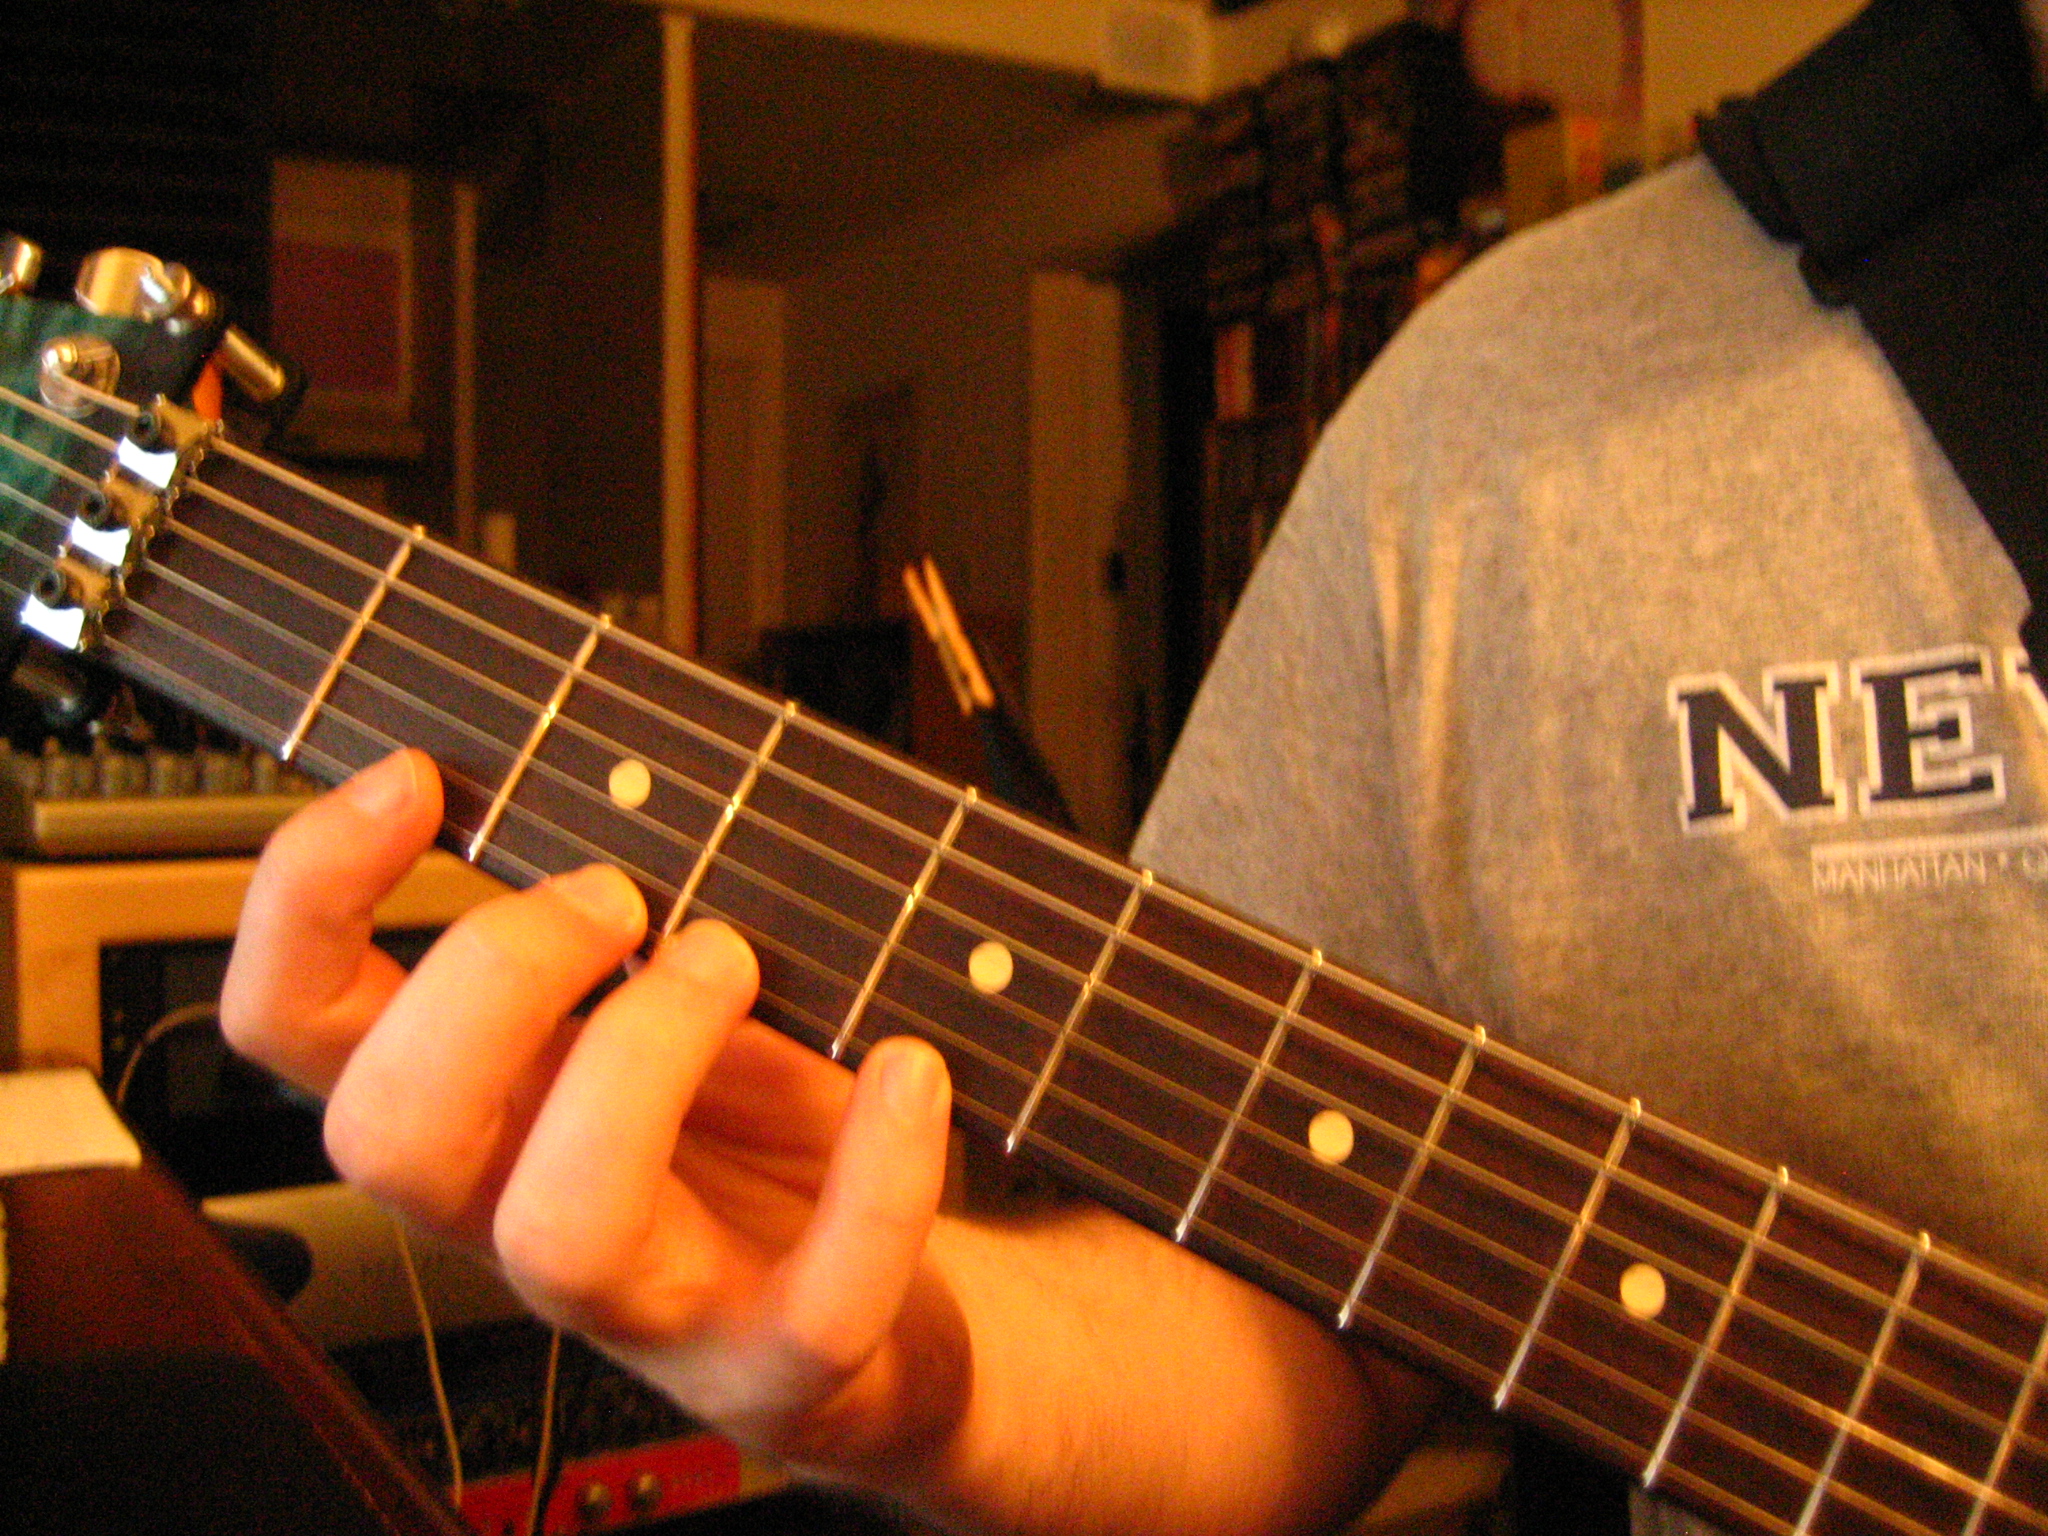 Vreny showing the Perfect hand position on guitar: the straight wrist